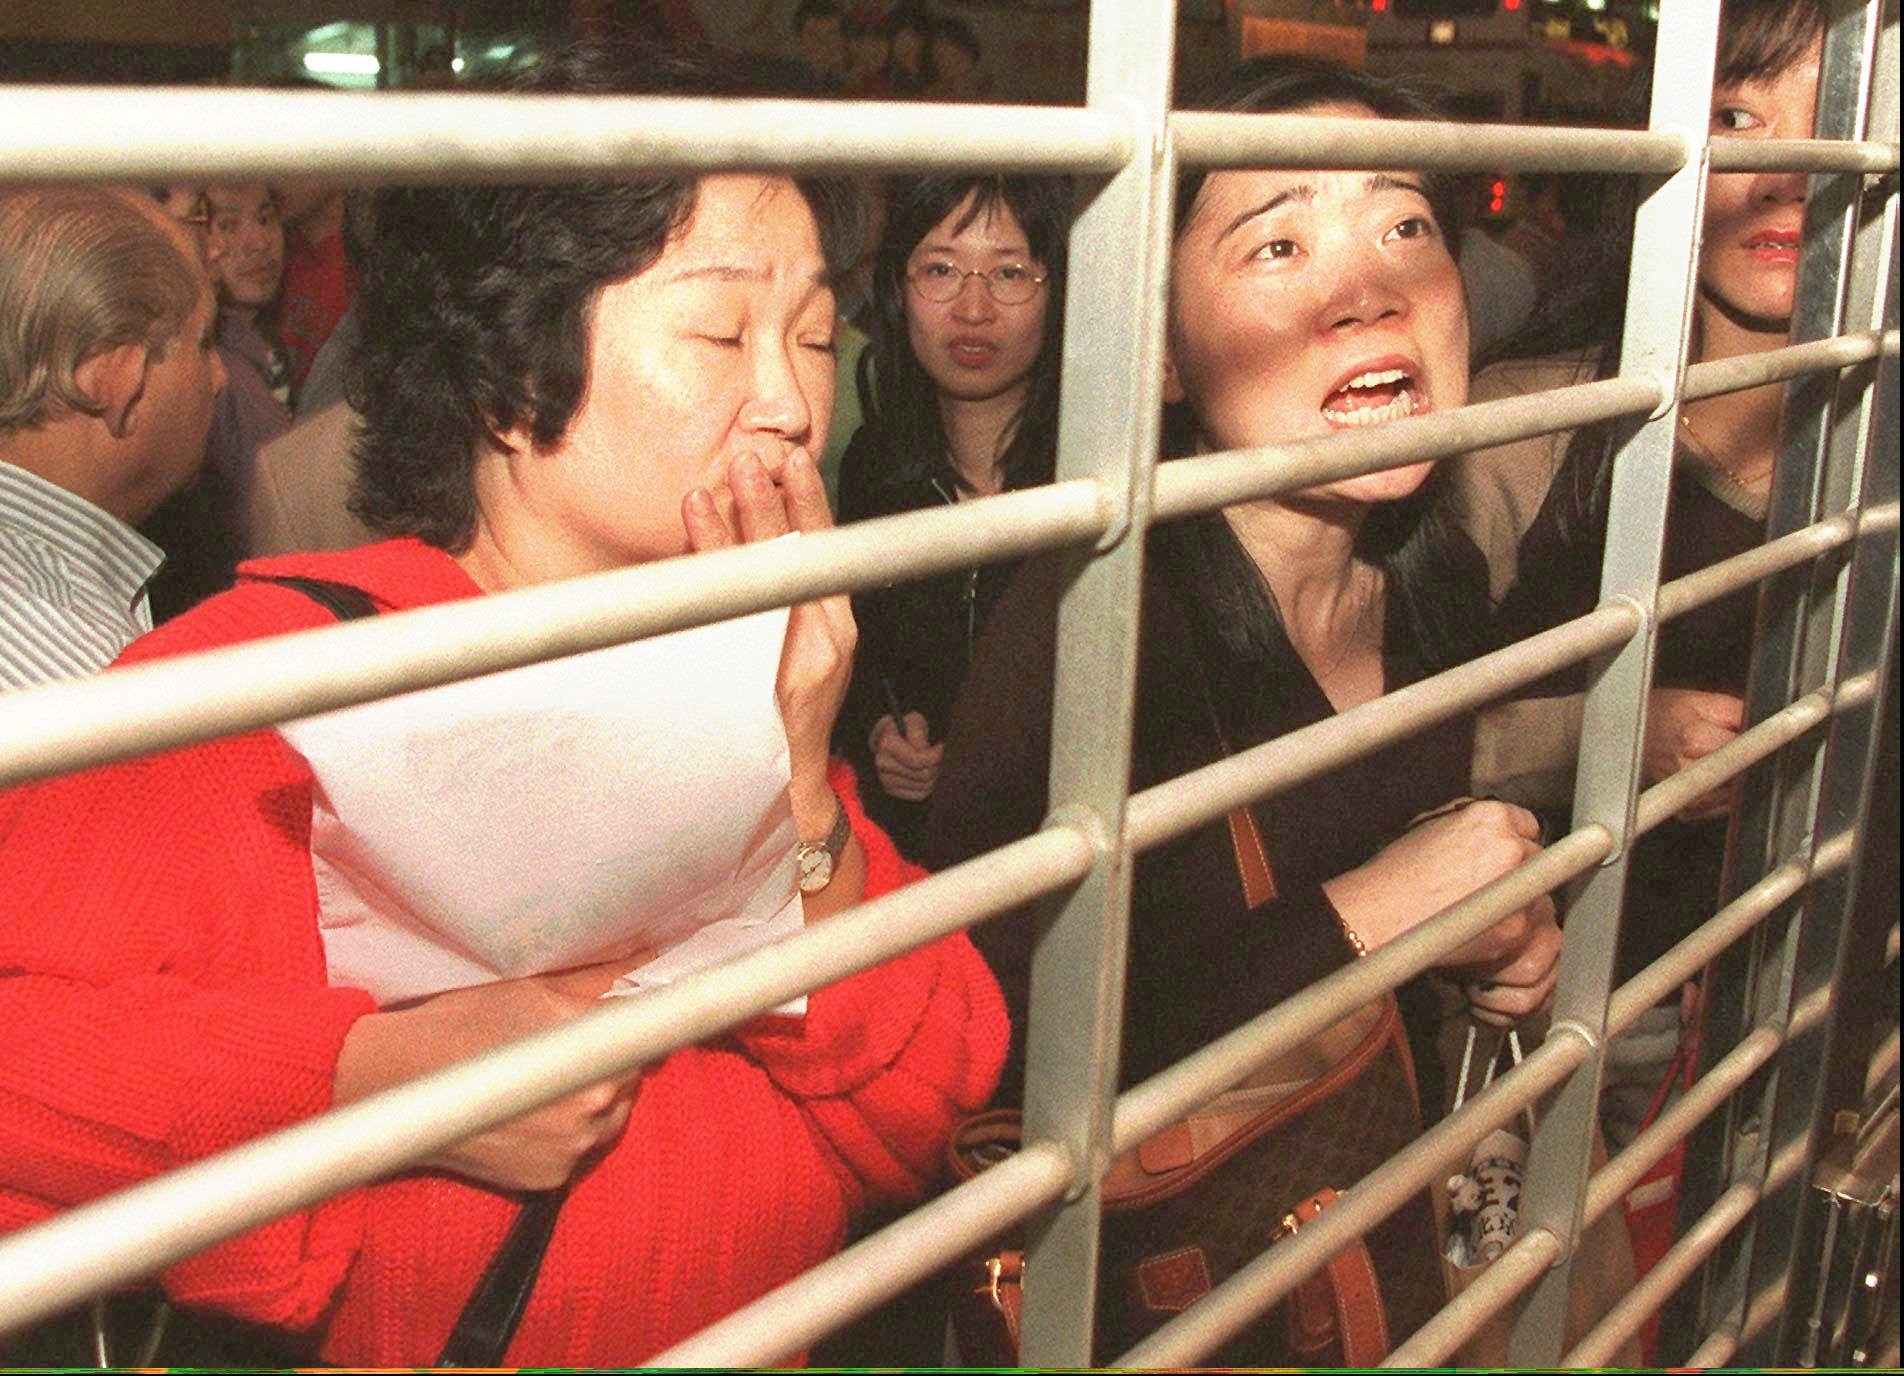 Customers gather outside the International Bank of Asia in Hong Kong in 1997 following rumours of a bank run. The beginnings of the Asian financial crisis were missed by many reporters covering the Hong Kong handover. Photo: AFP